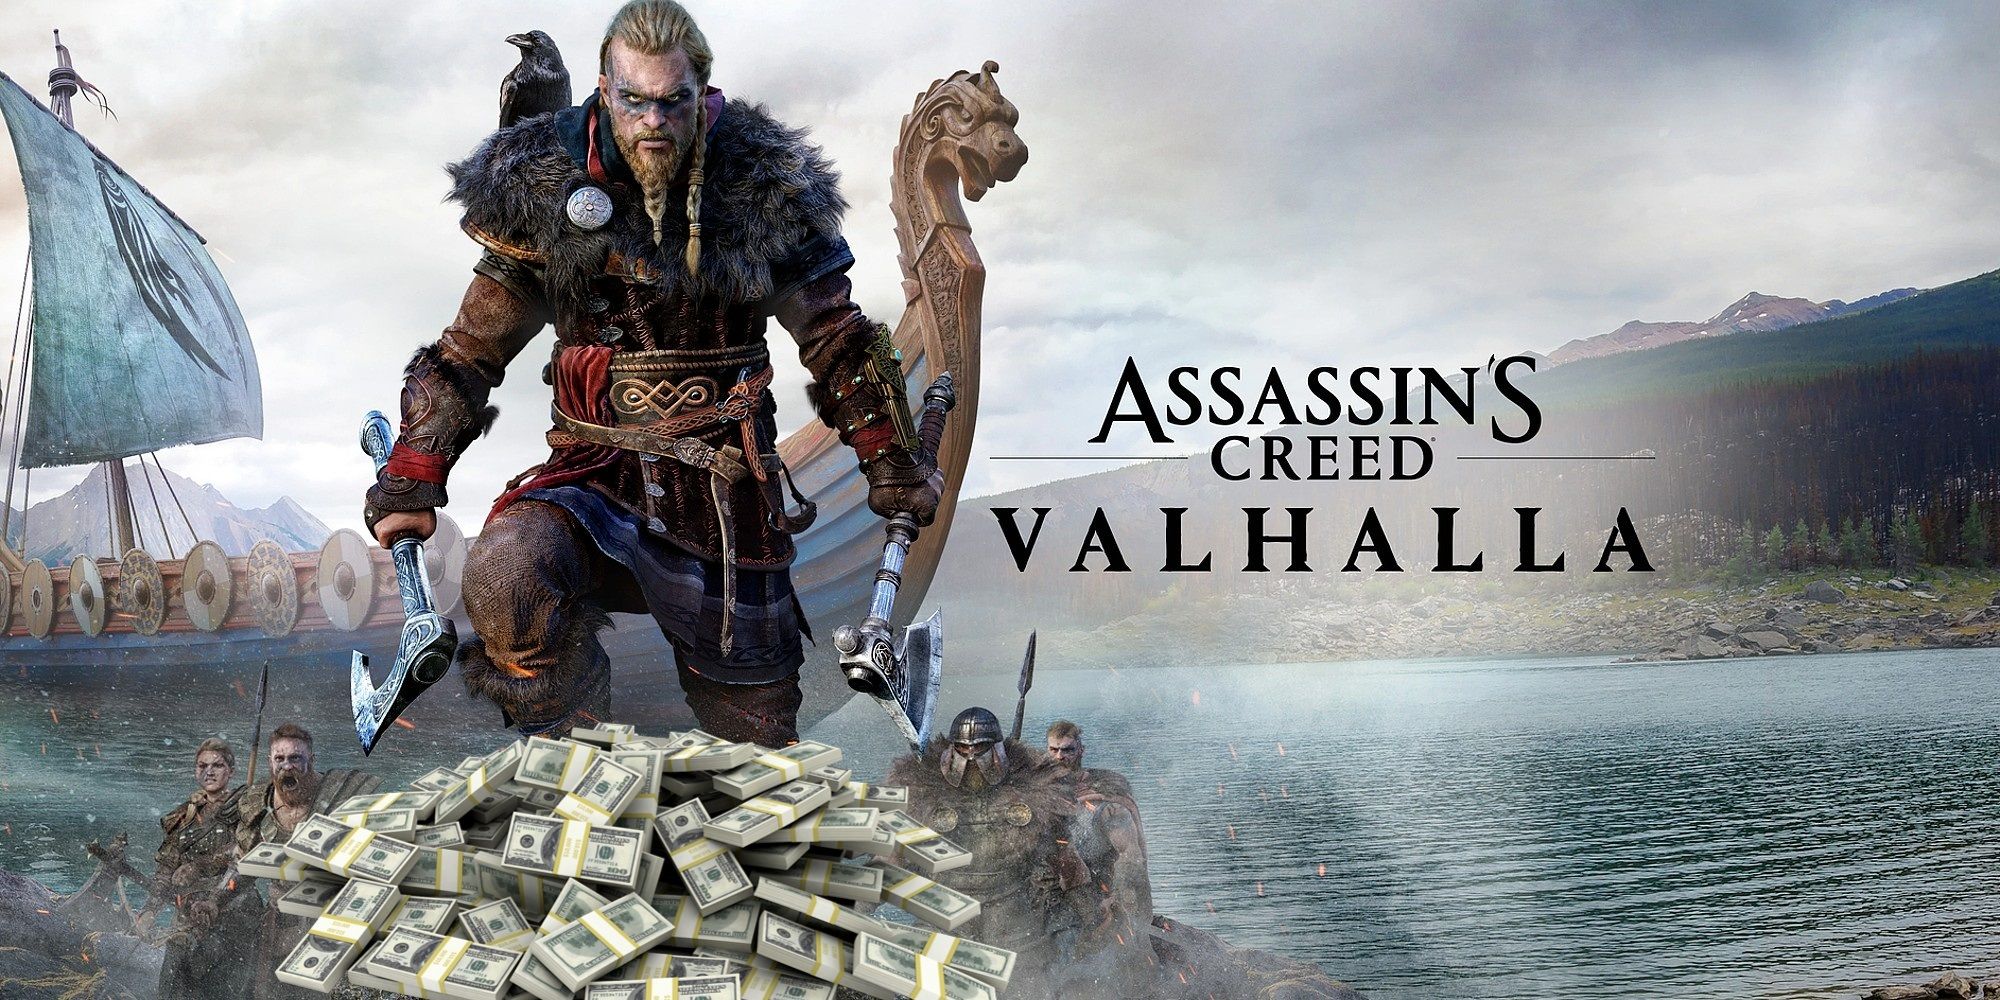 Ubisoft Says Assassin’s Creed Valhalla Is Its Second Largest Profit Generating Game Ever